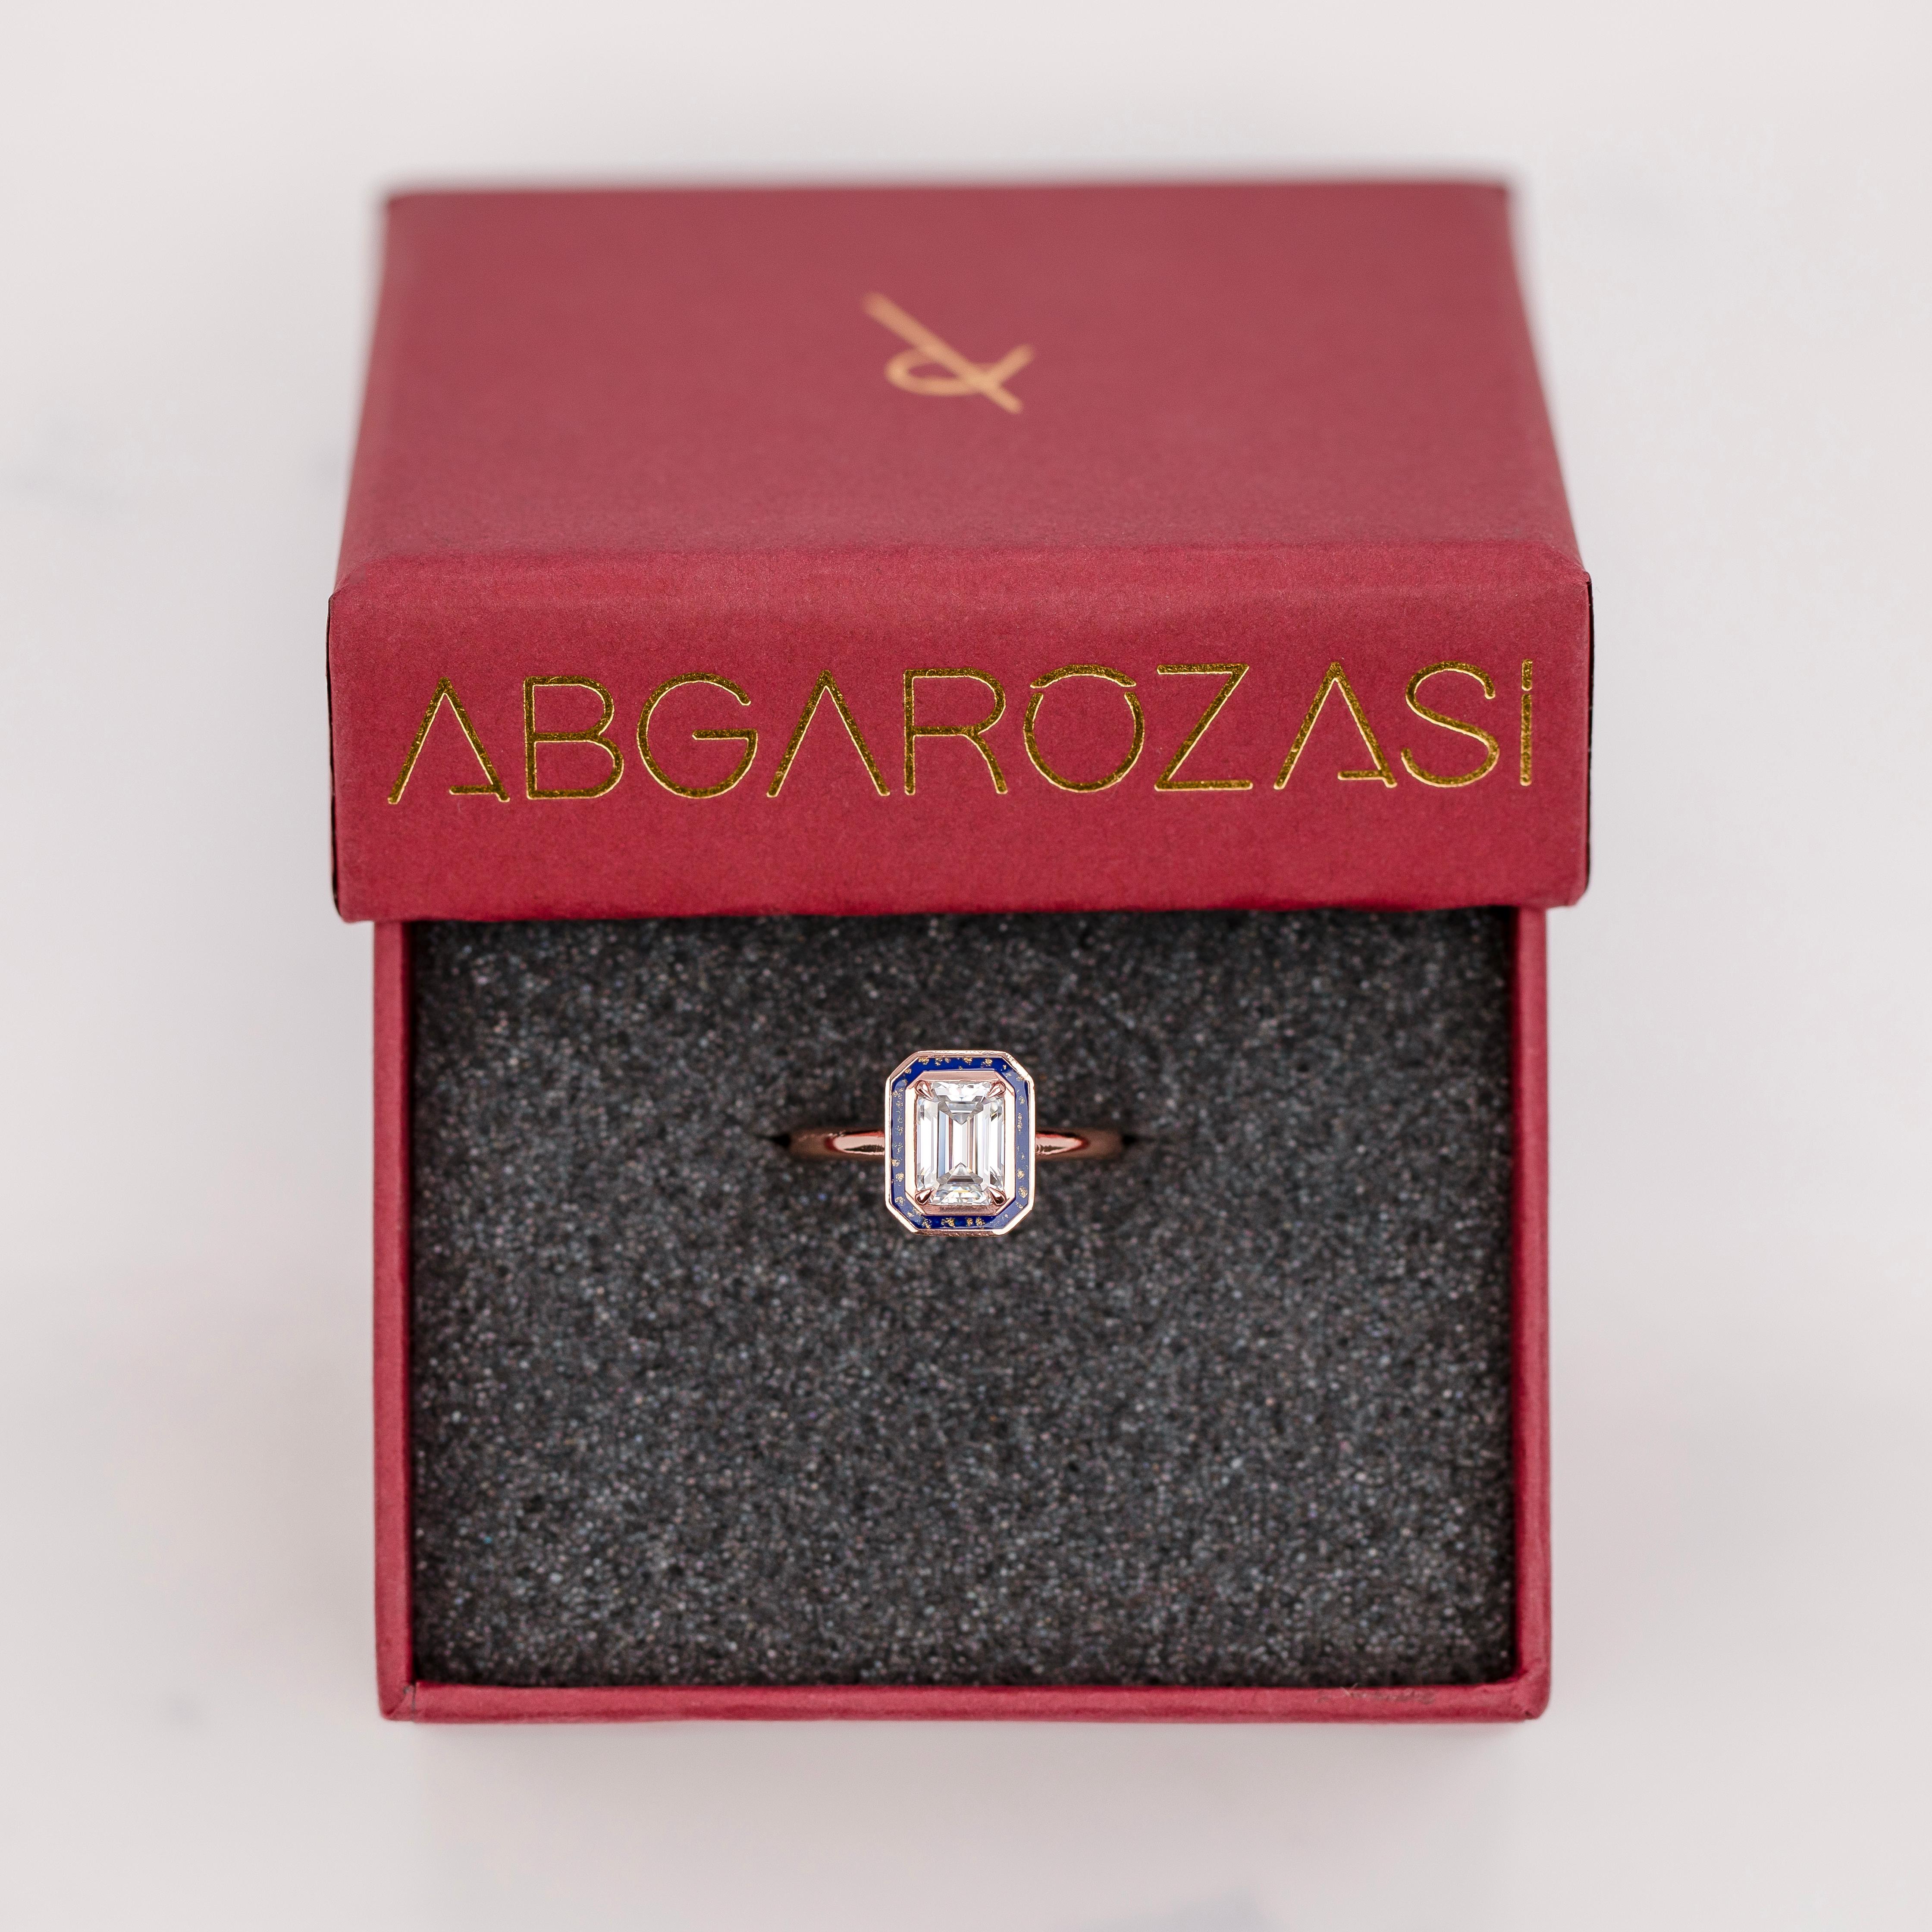 Art Deco Style, 0.90-1.00 Ct Moissanite Stone and Colorful Enamel, 14K Gold Ring For Sale 4